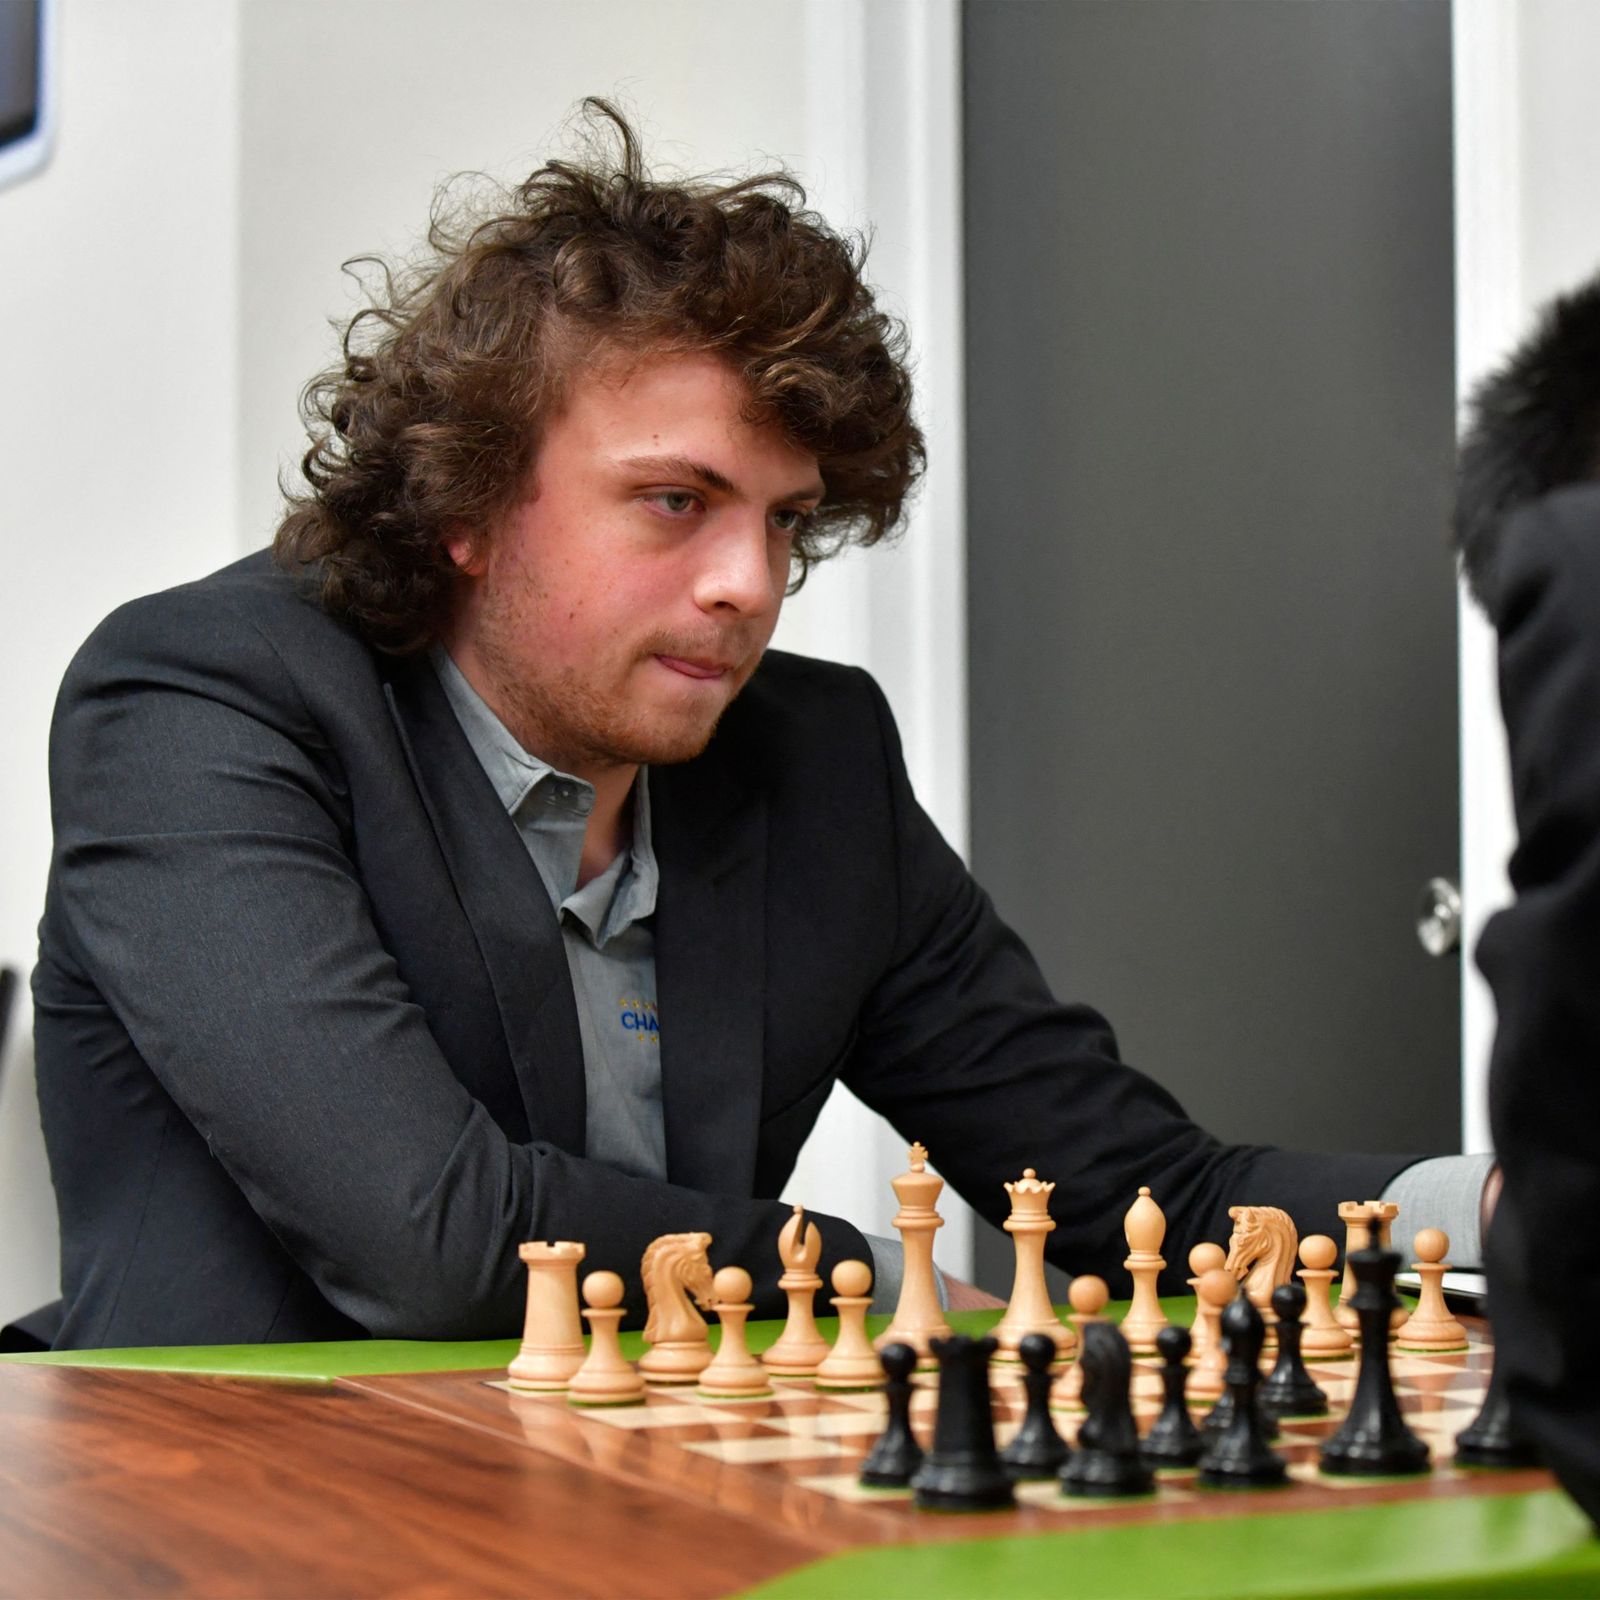 Disgraced chess grandmaster embroiled in fresh scandal